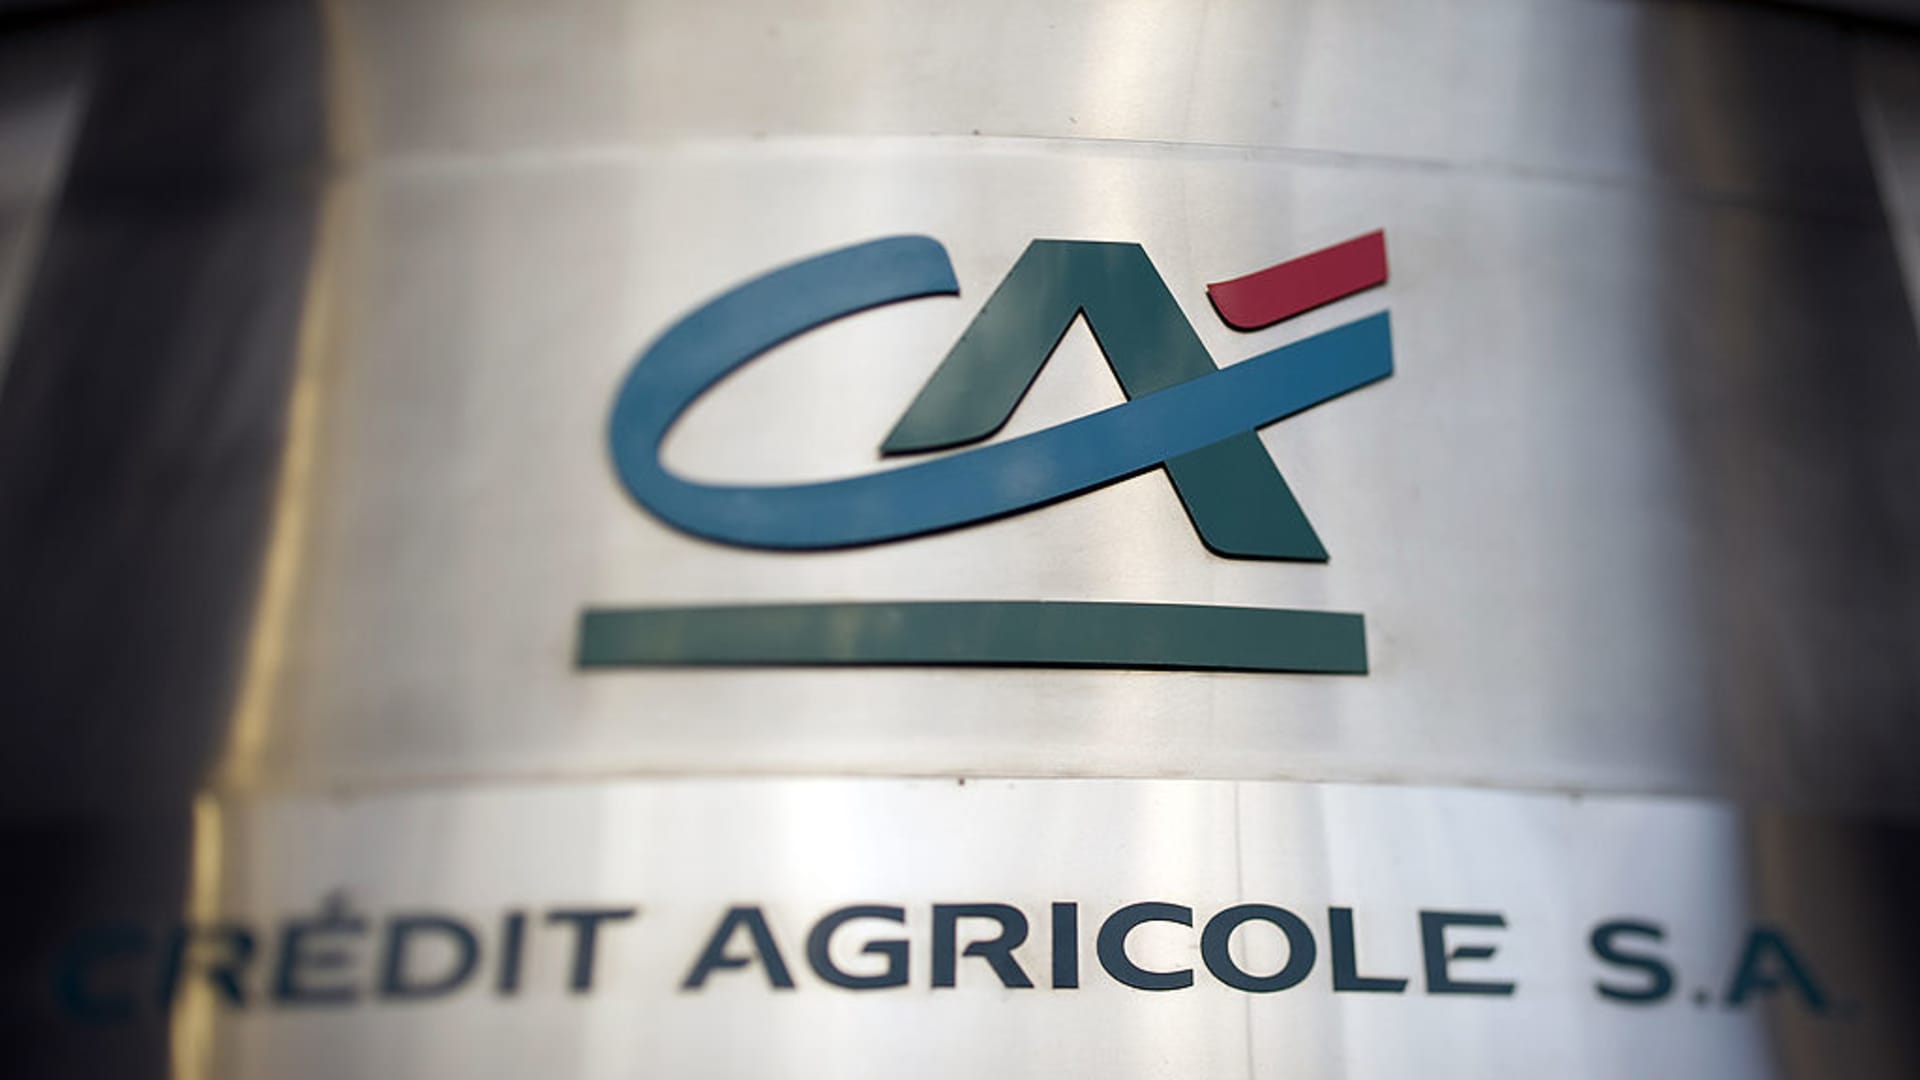 Credit Agricole’s first-quarter earnings jump as investment banking beats rivals